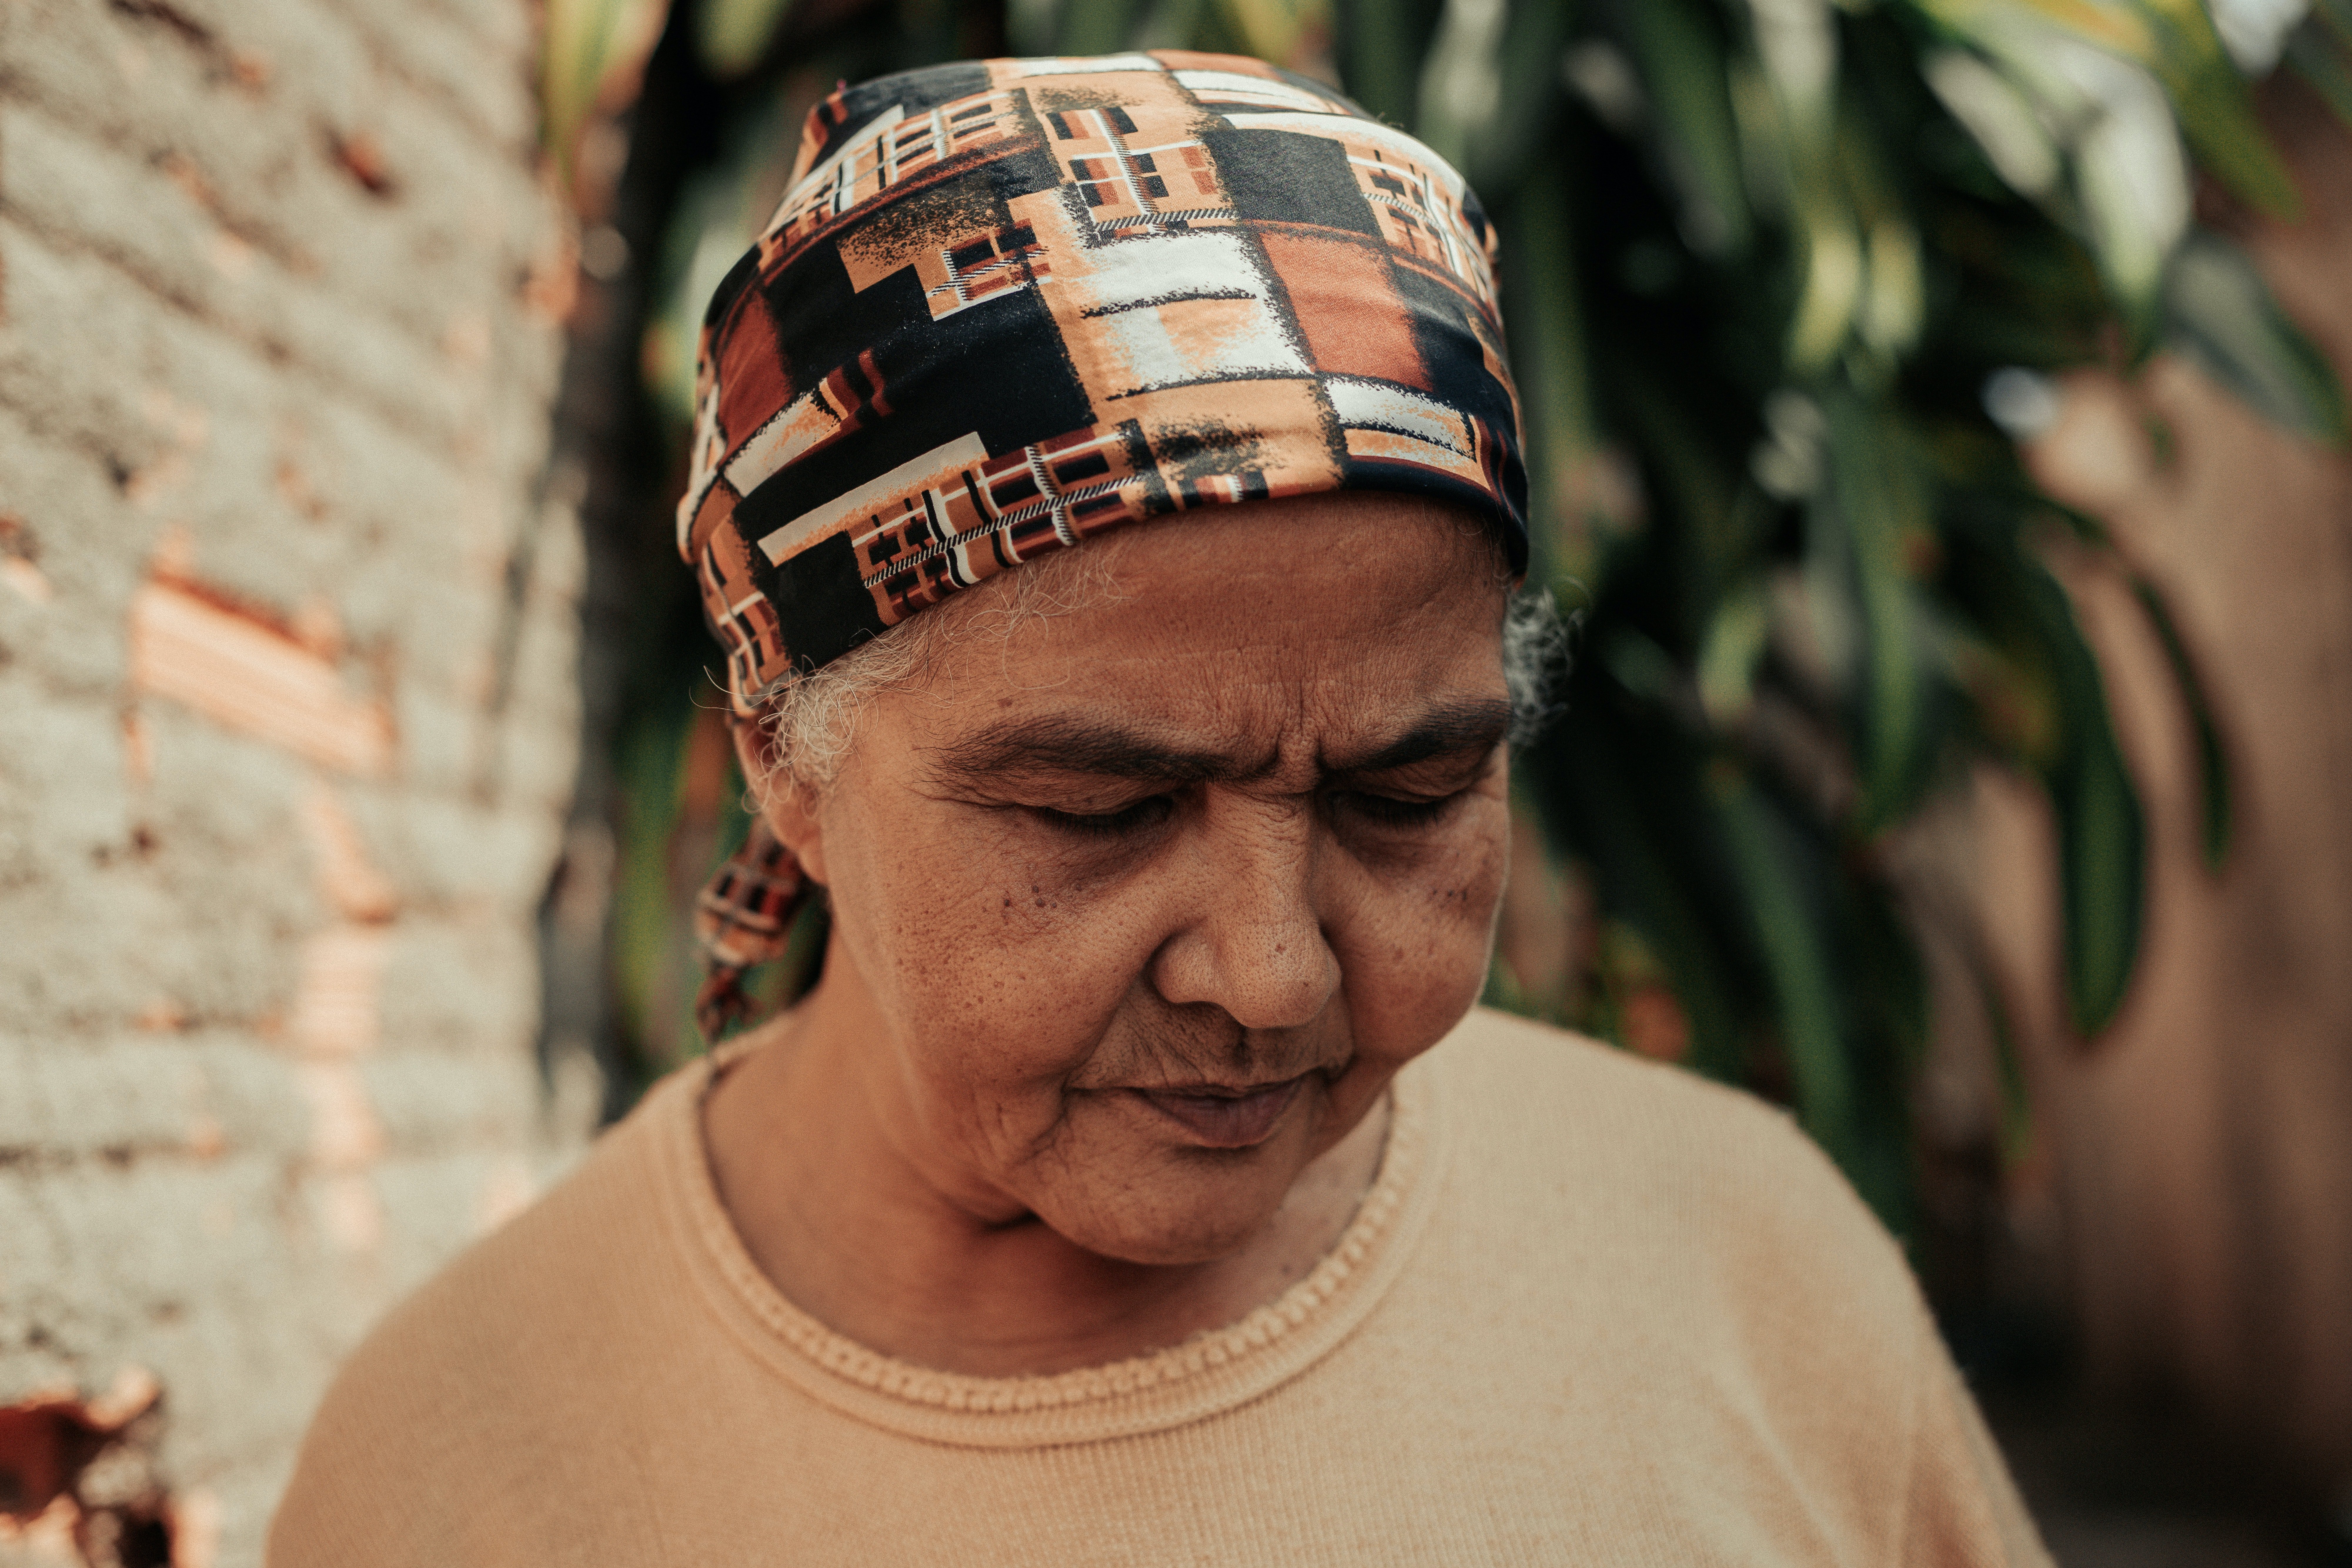 Cynthia gave shelter to the poor old woman. | Source: Pexels